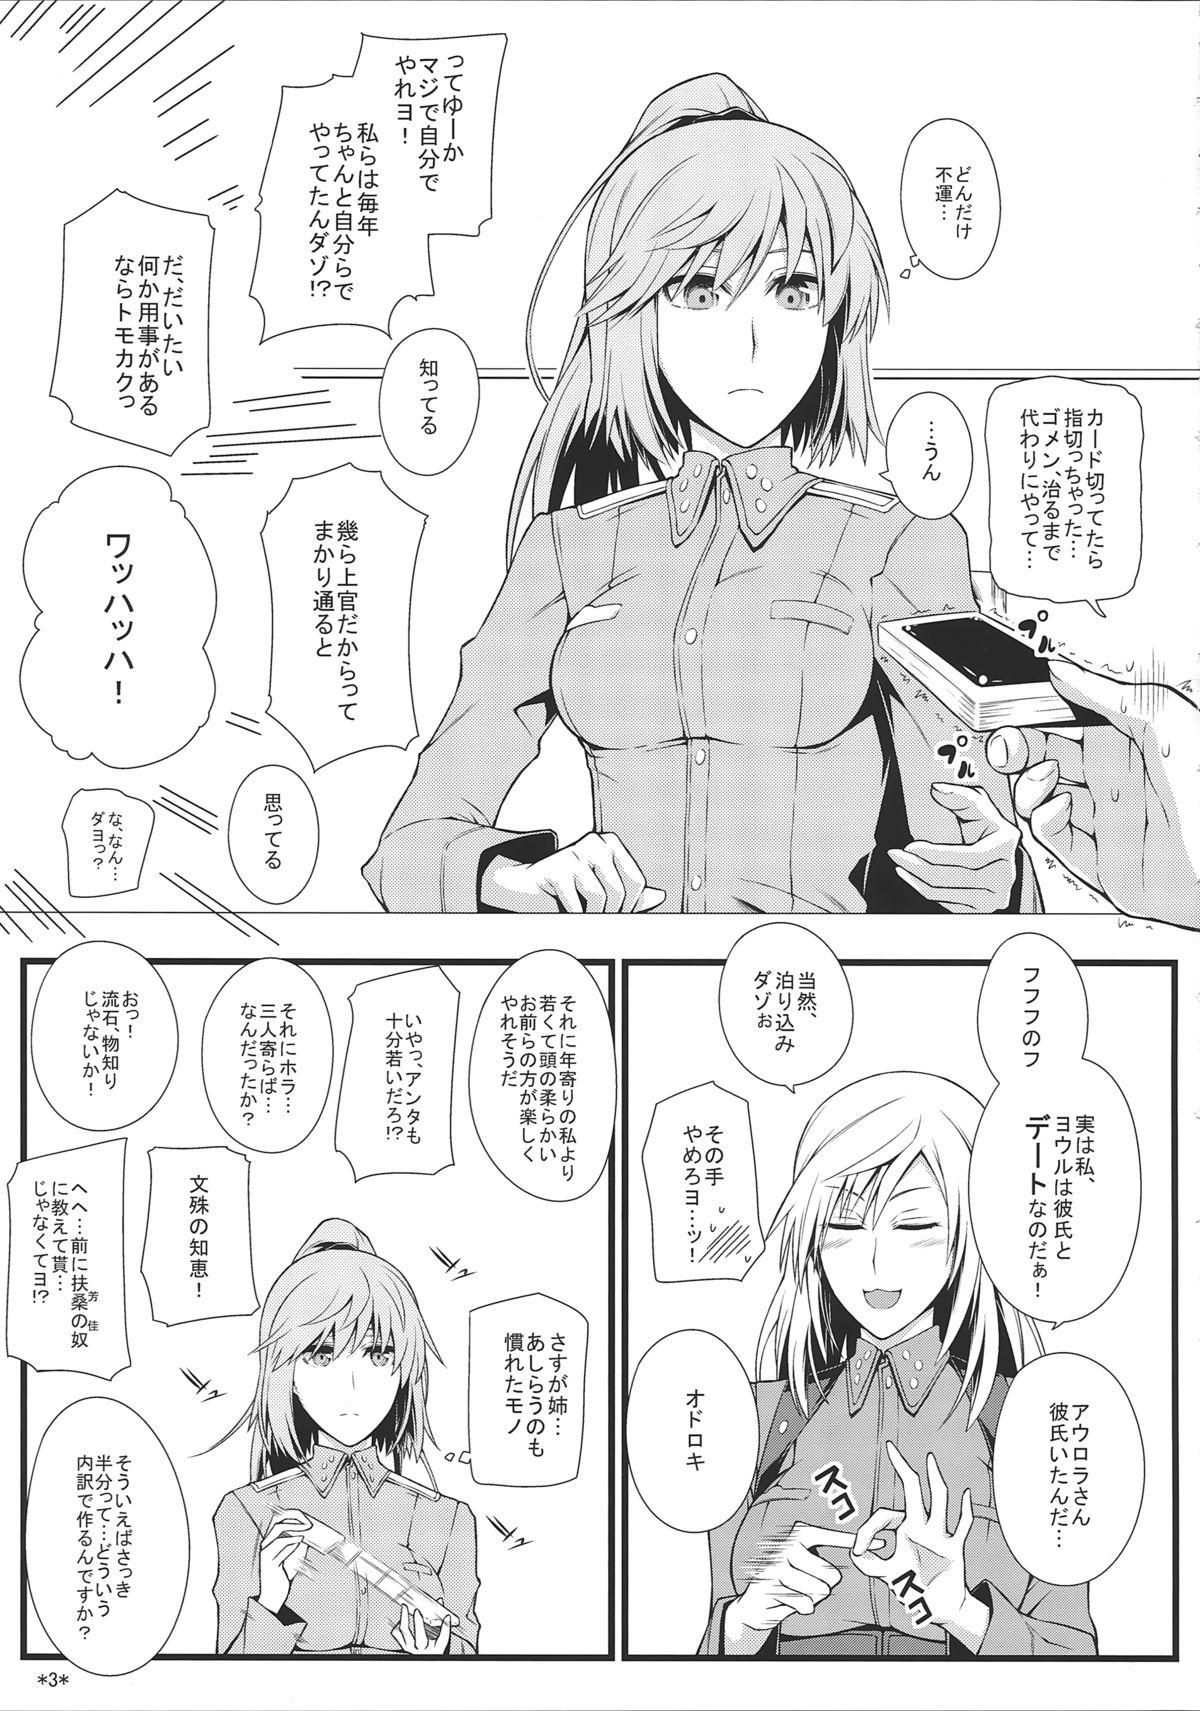 Ducha KARLSLAND SYNDROME 3 - Strike witches Candid - Page 5